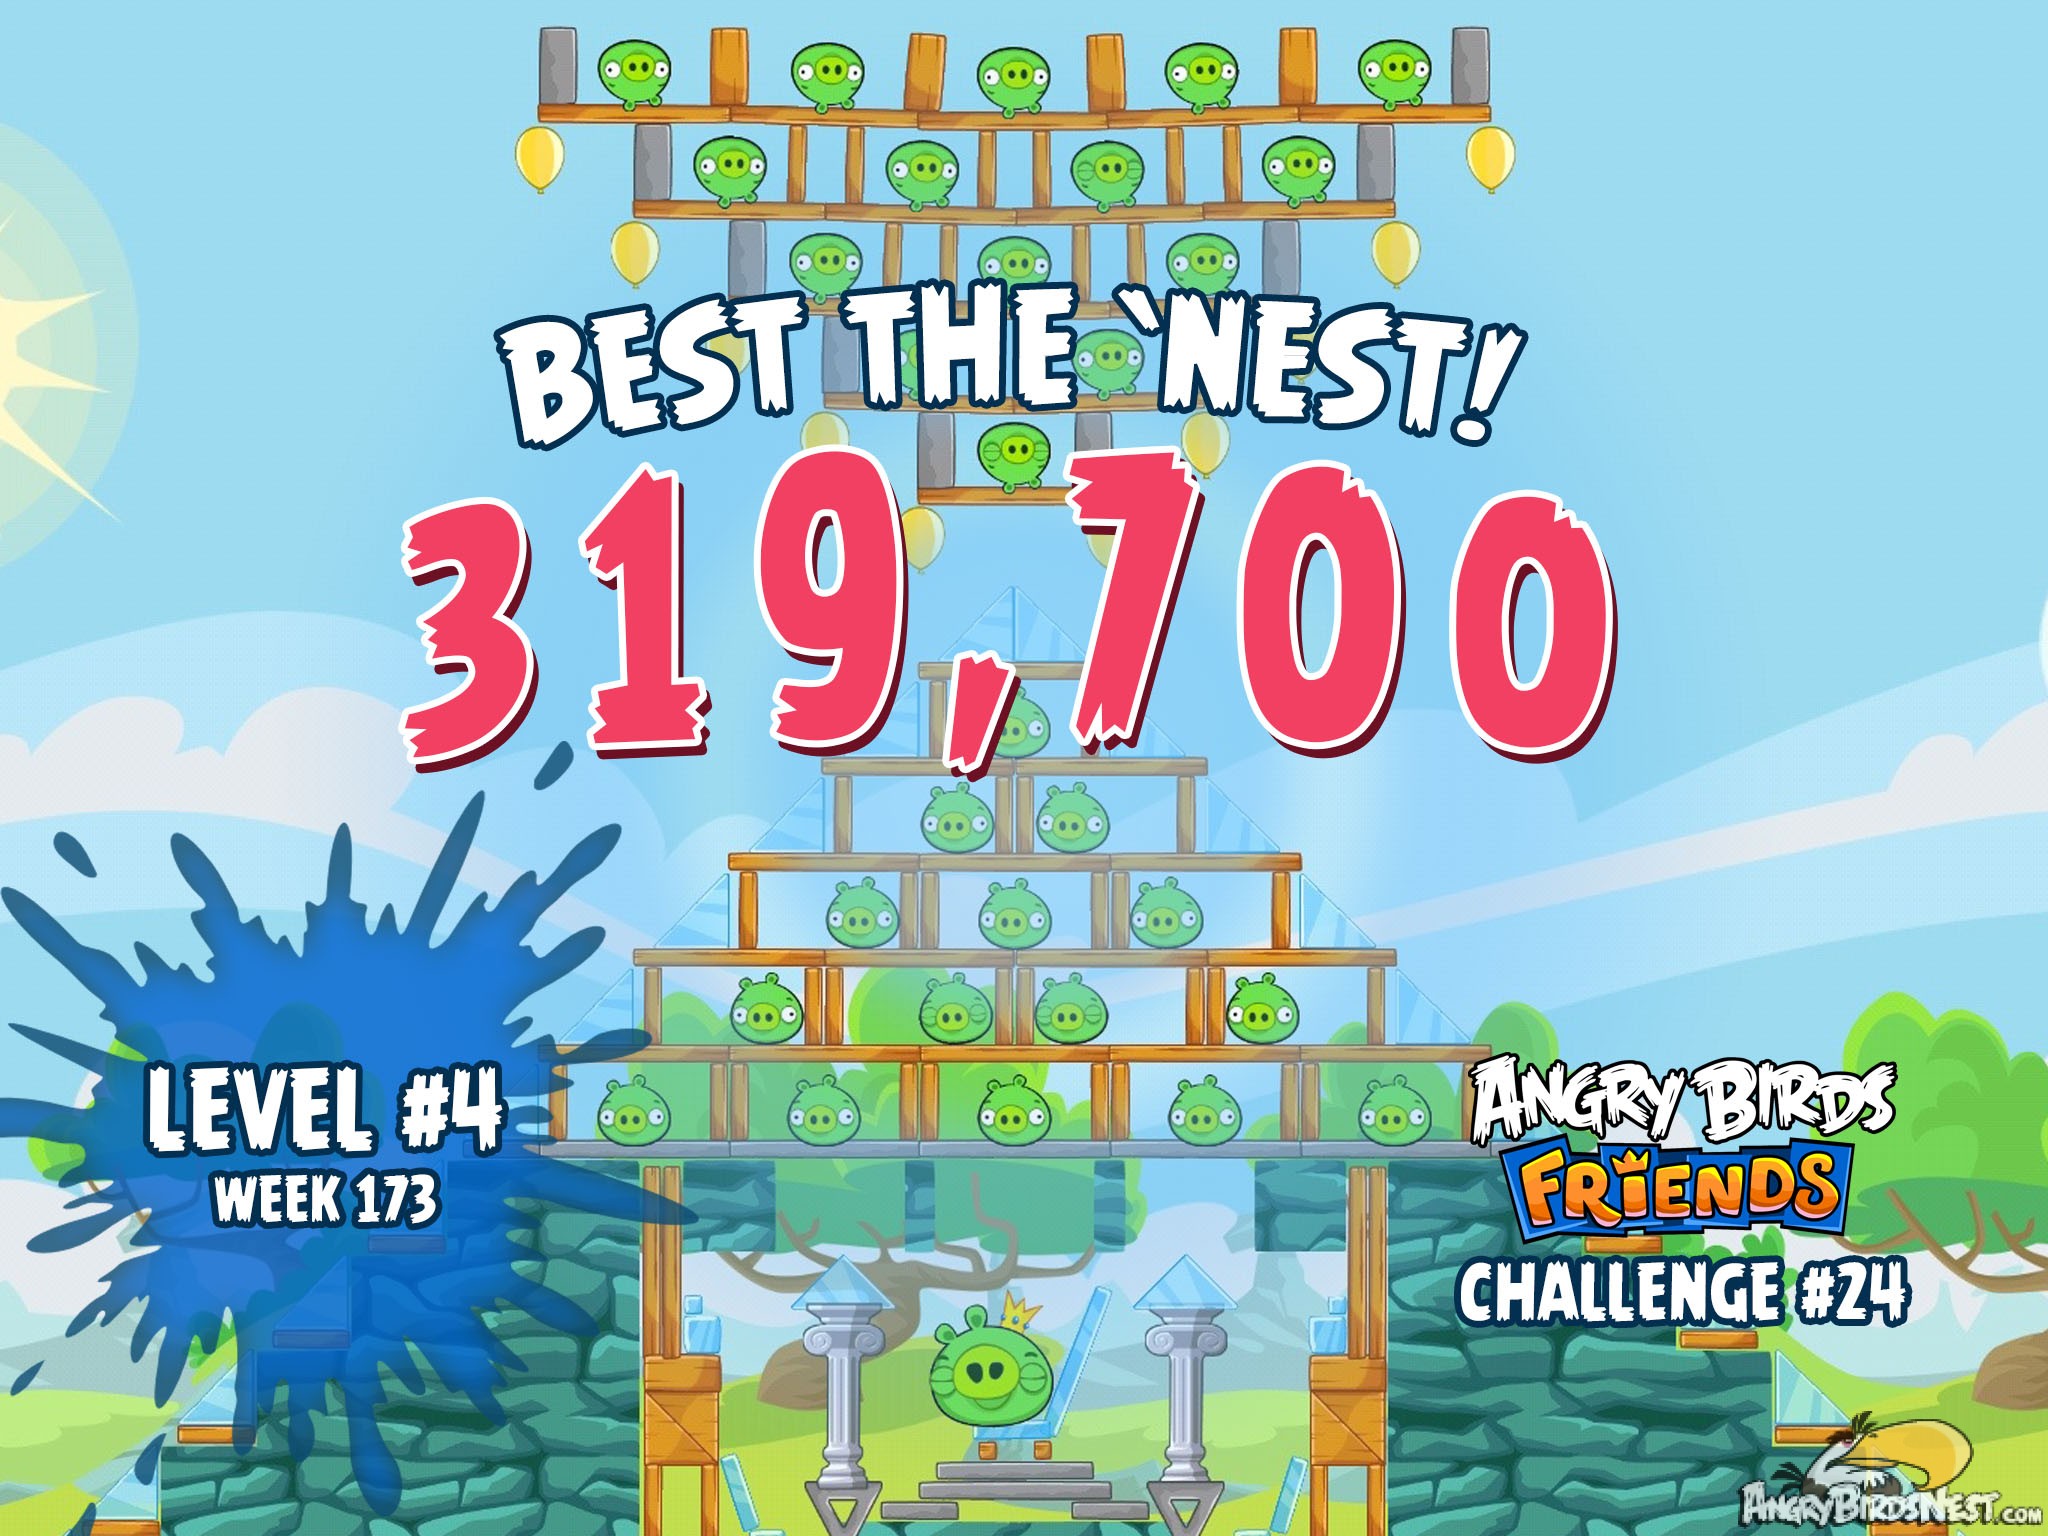 Angry Birds Friends Best the Nest Challenge Week 24